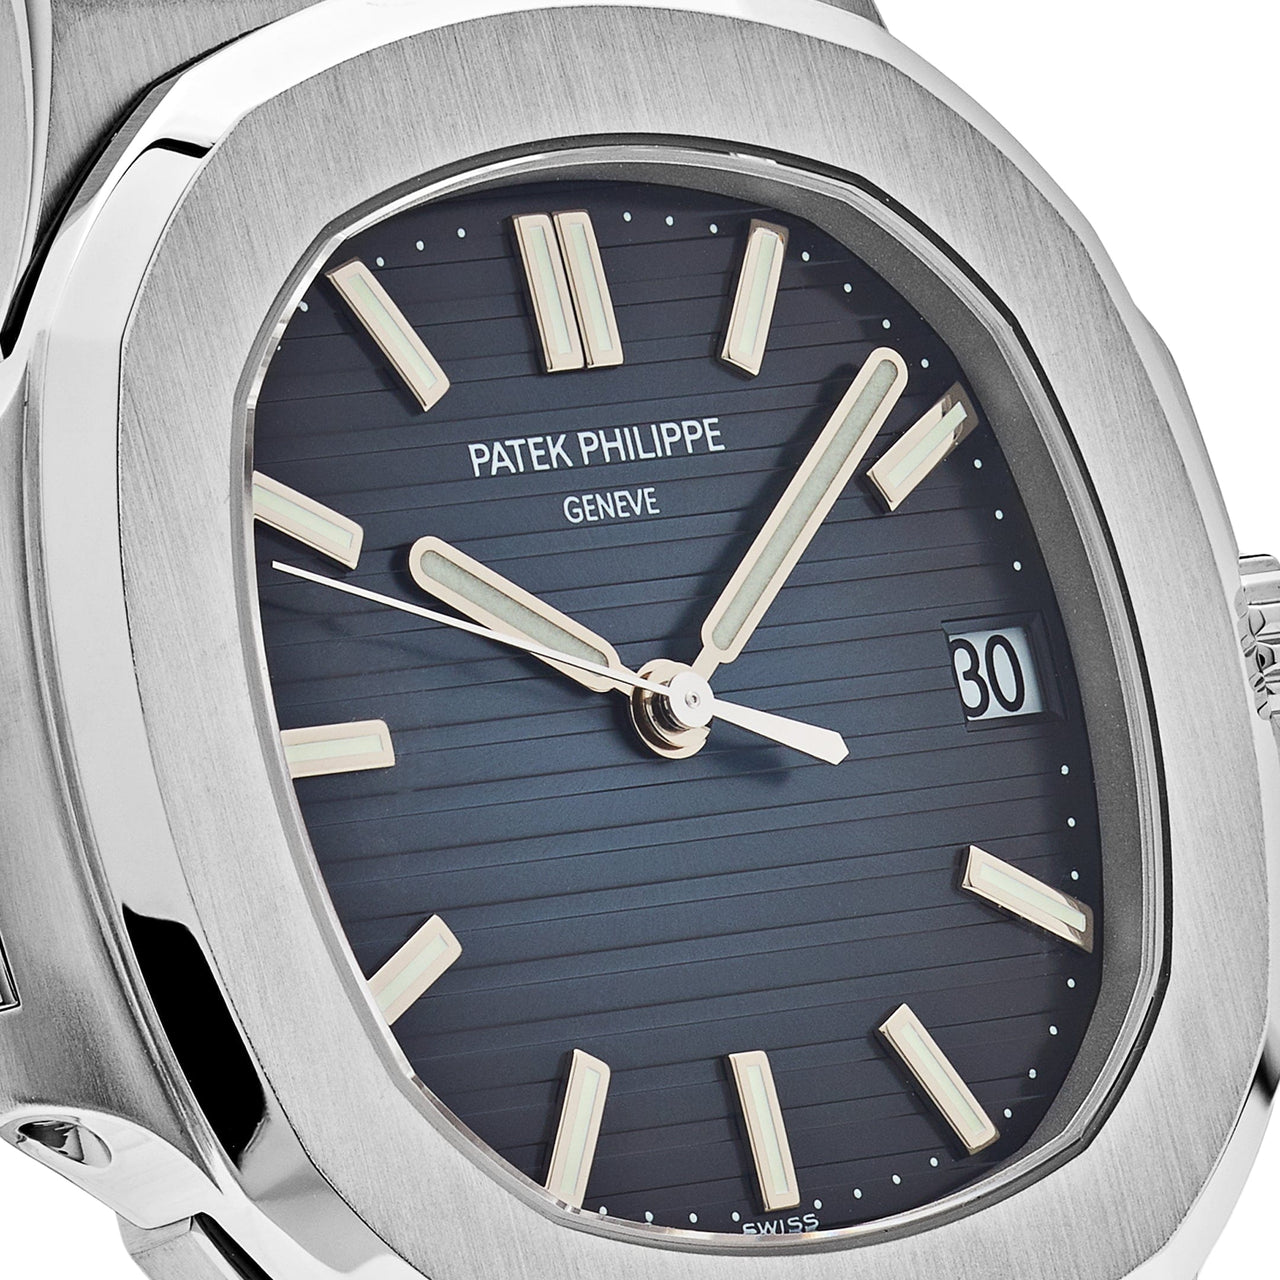 Patek Philippe Nautilus 5711/1A-010 Date Stainless Steel Blue Dial (2017)